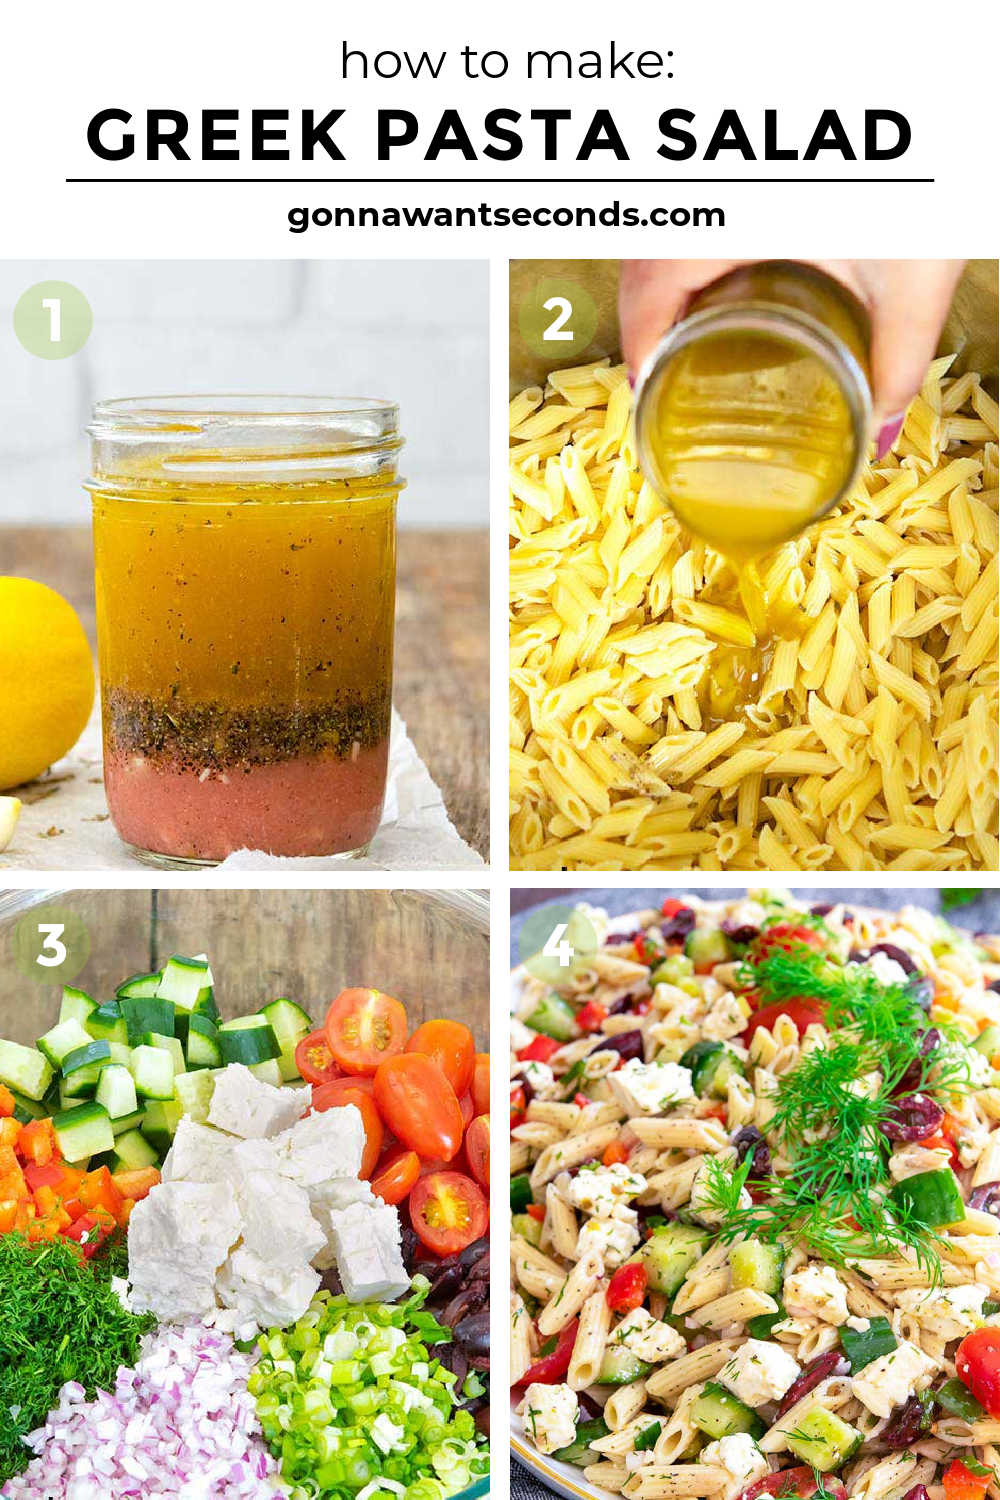 Step by step how to make greek pasta salad